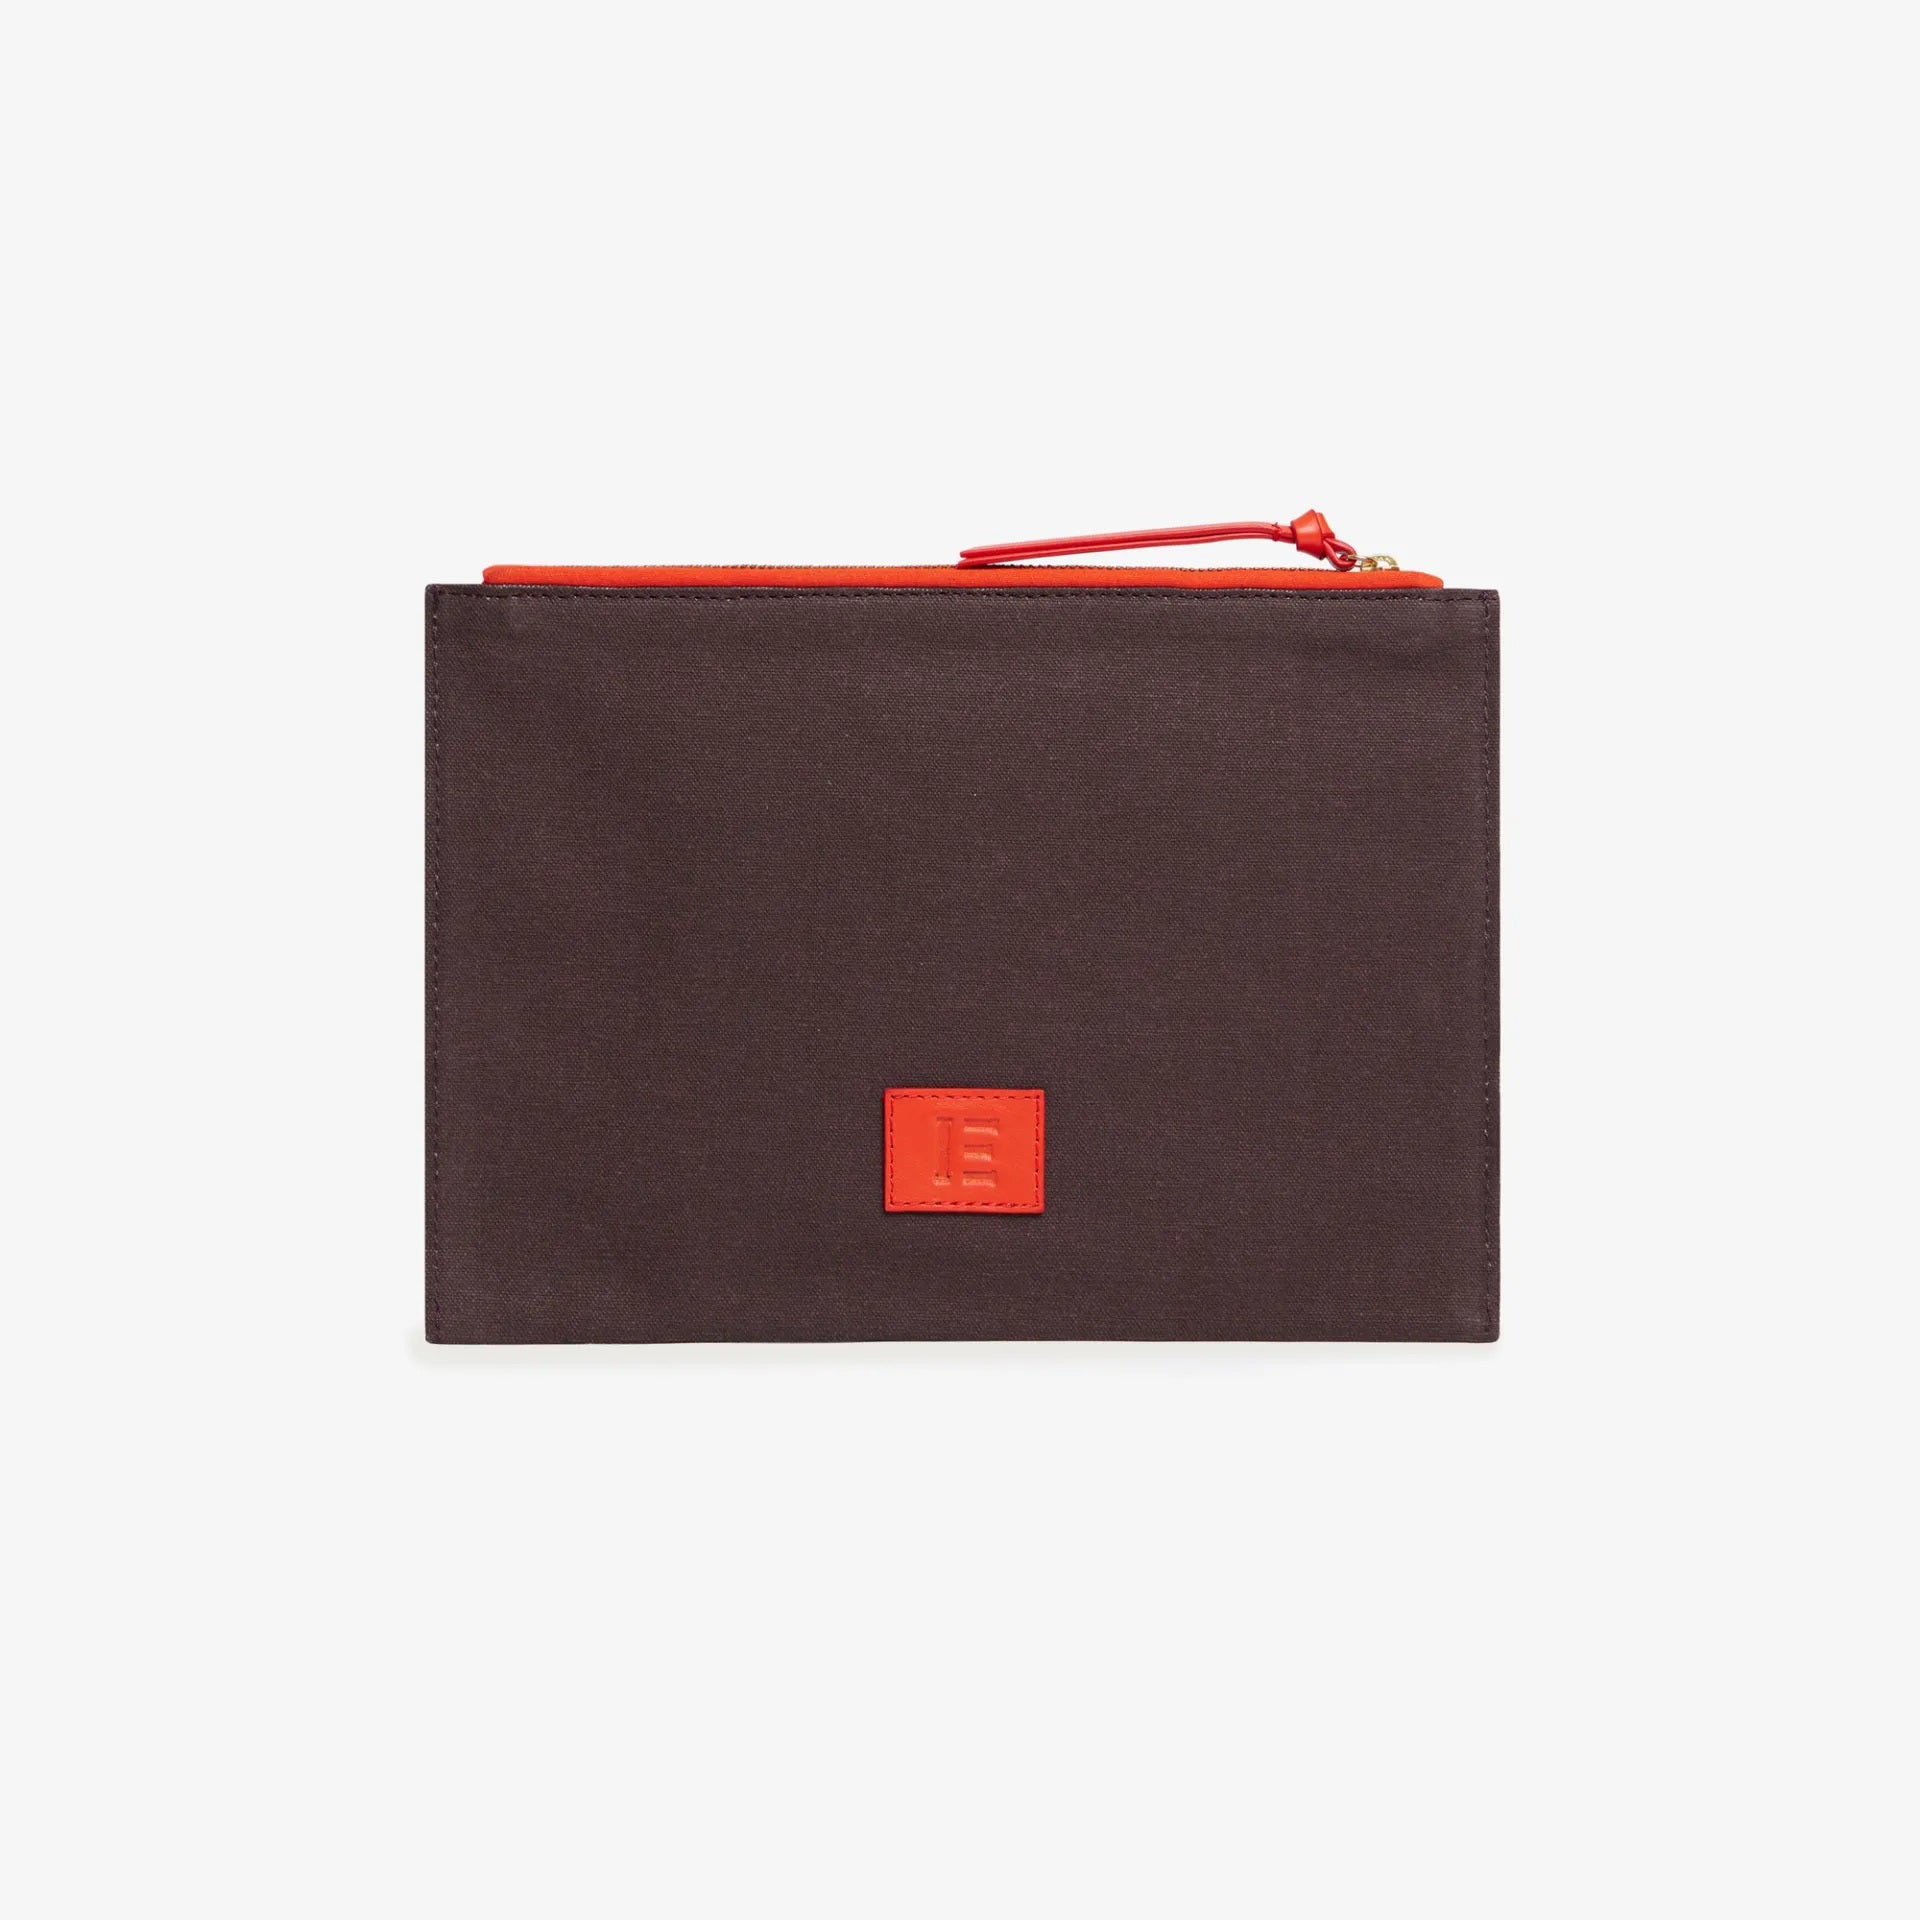 INOUI EDITIONS - EMBROIDERED POUCH